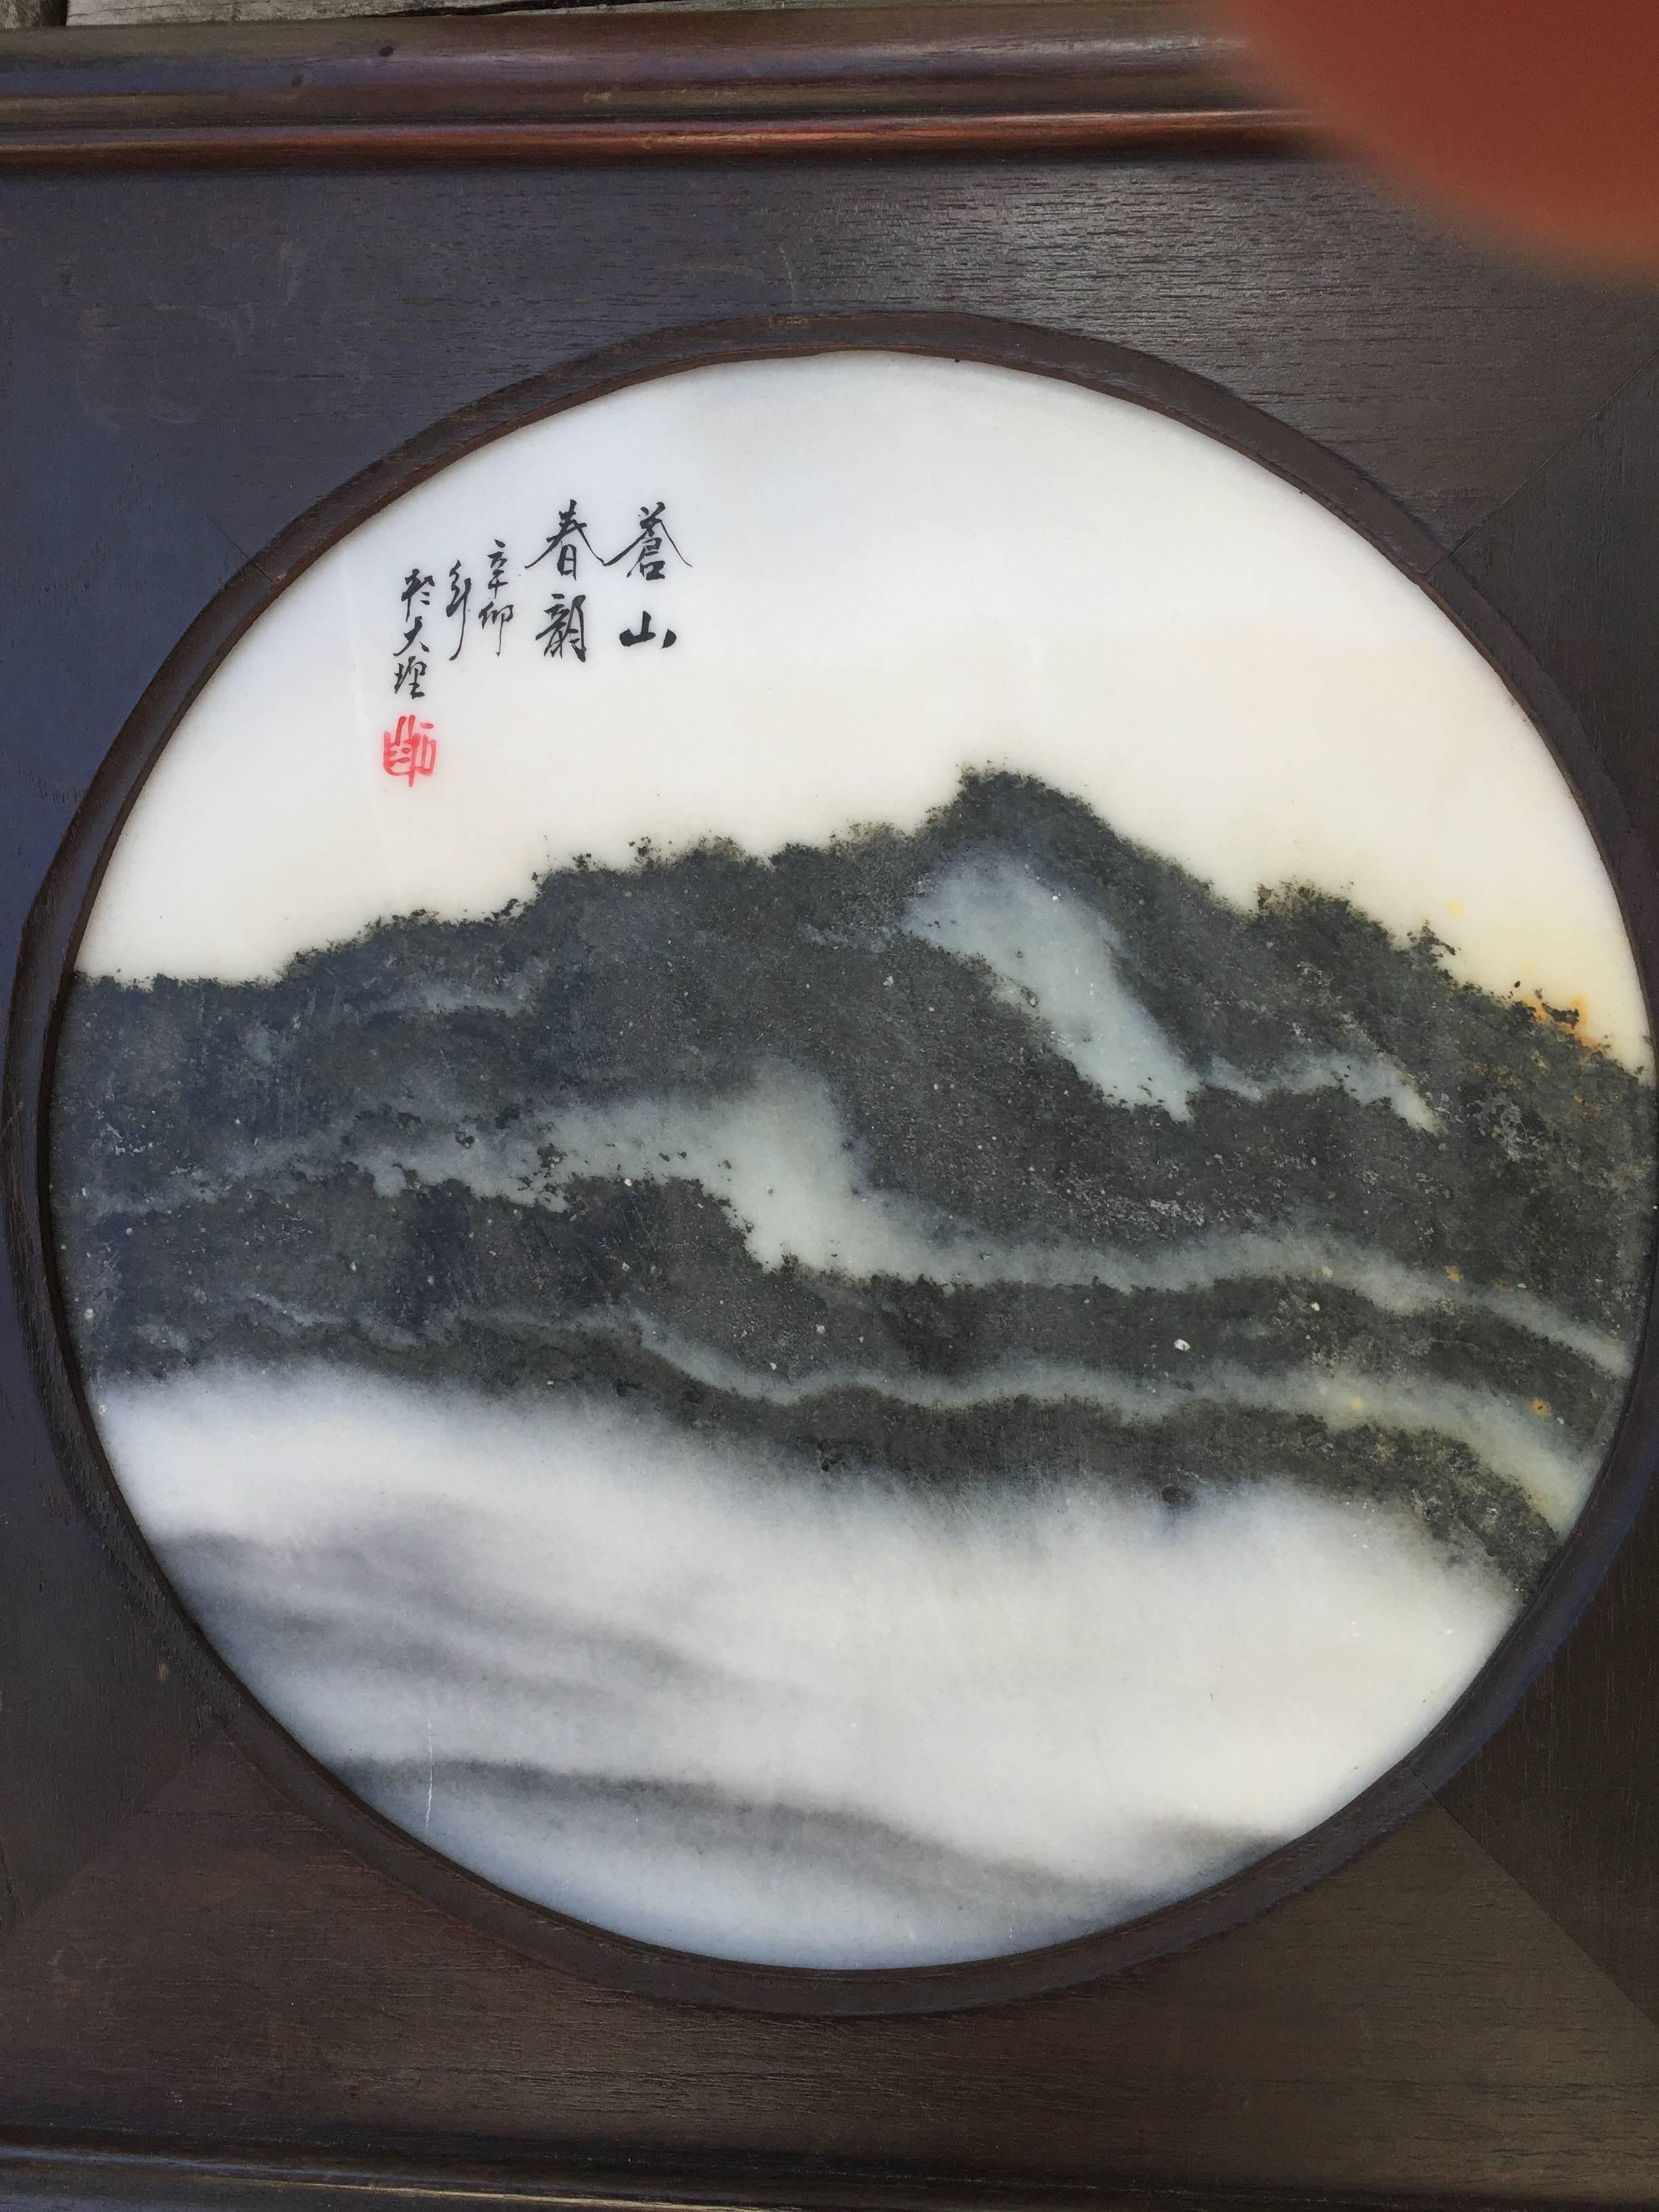 This Chinese extraordinary natural stone painting of a green mountain peak, also called a dreamstone, is cut from historic Dali marble, known for incredible fantastic natural landscapes caused from mineral inclusions, and cut by local Yunnan